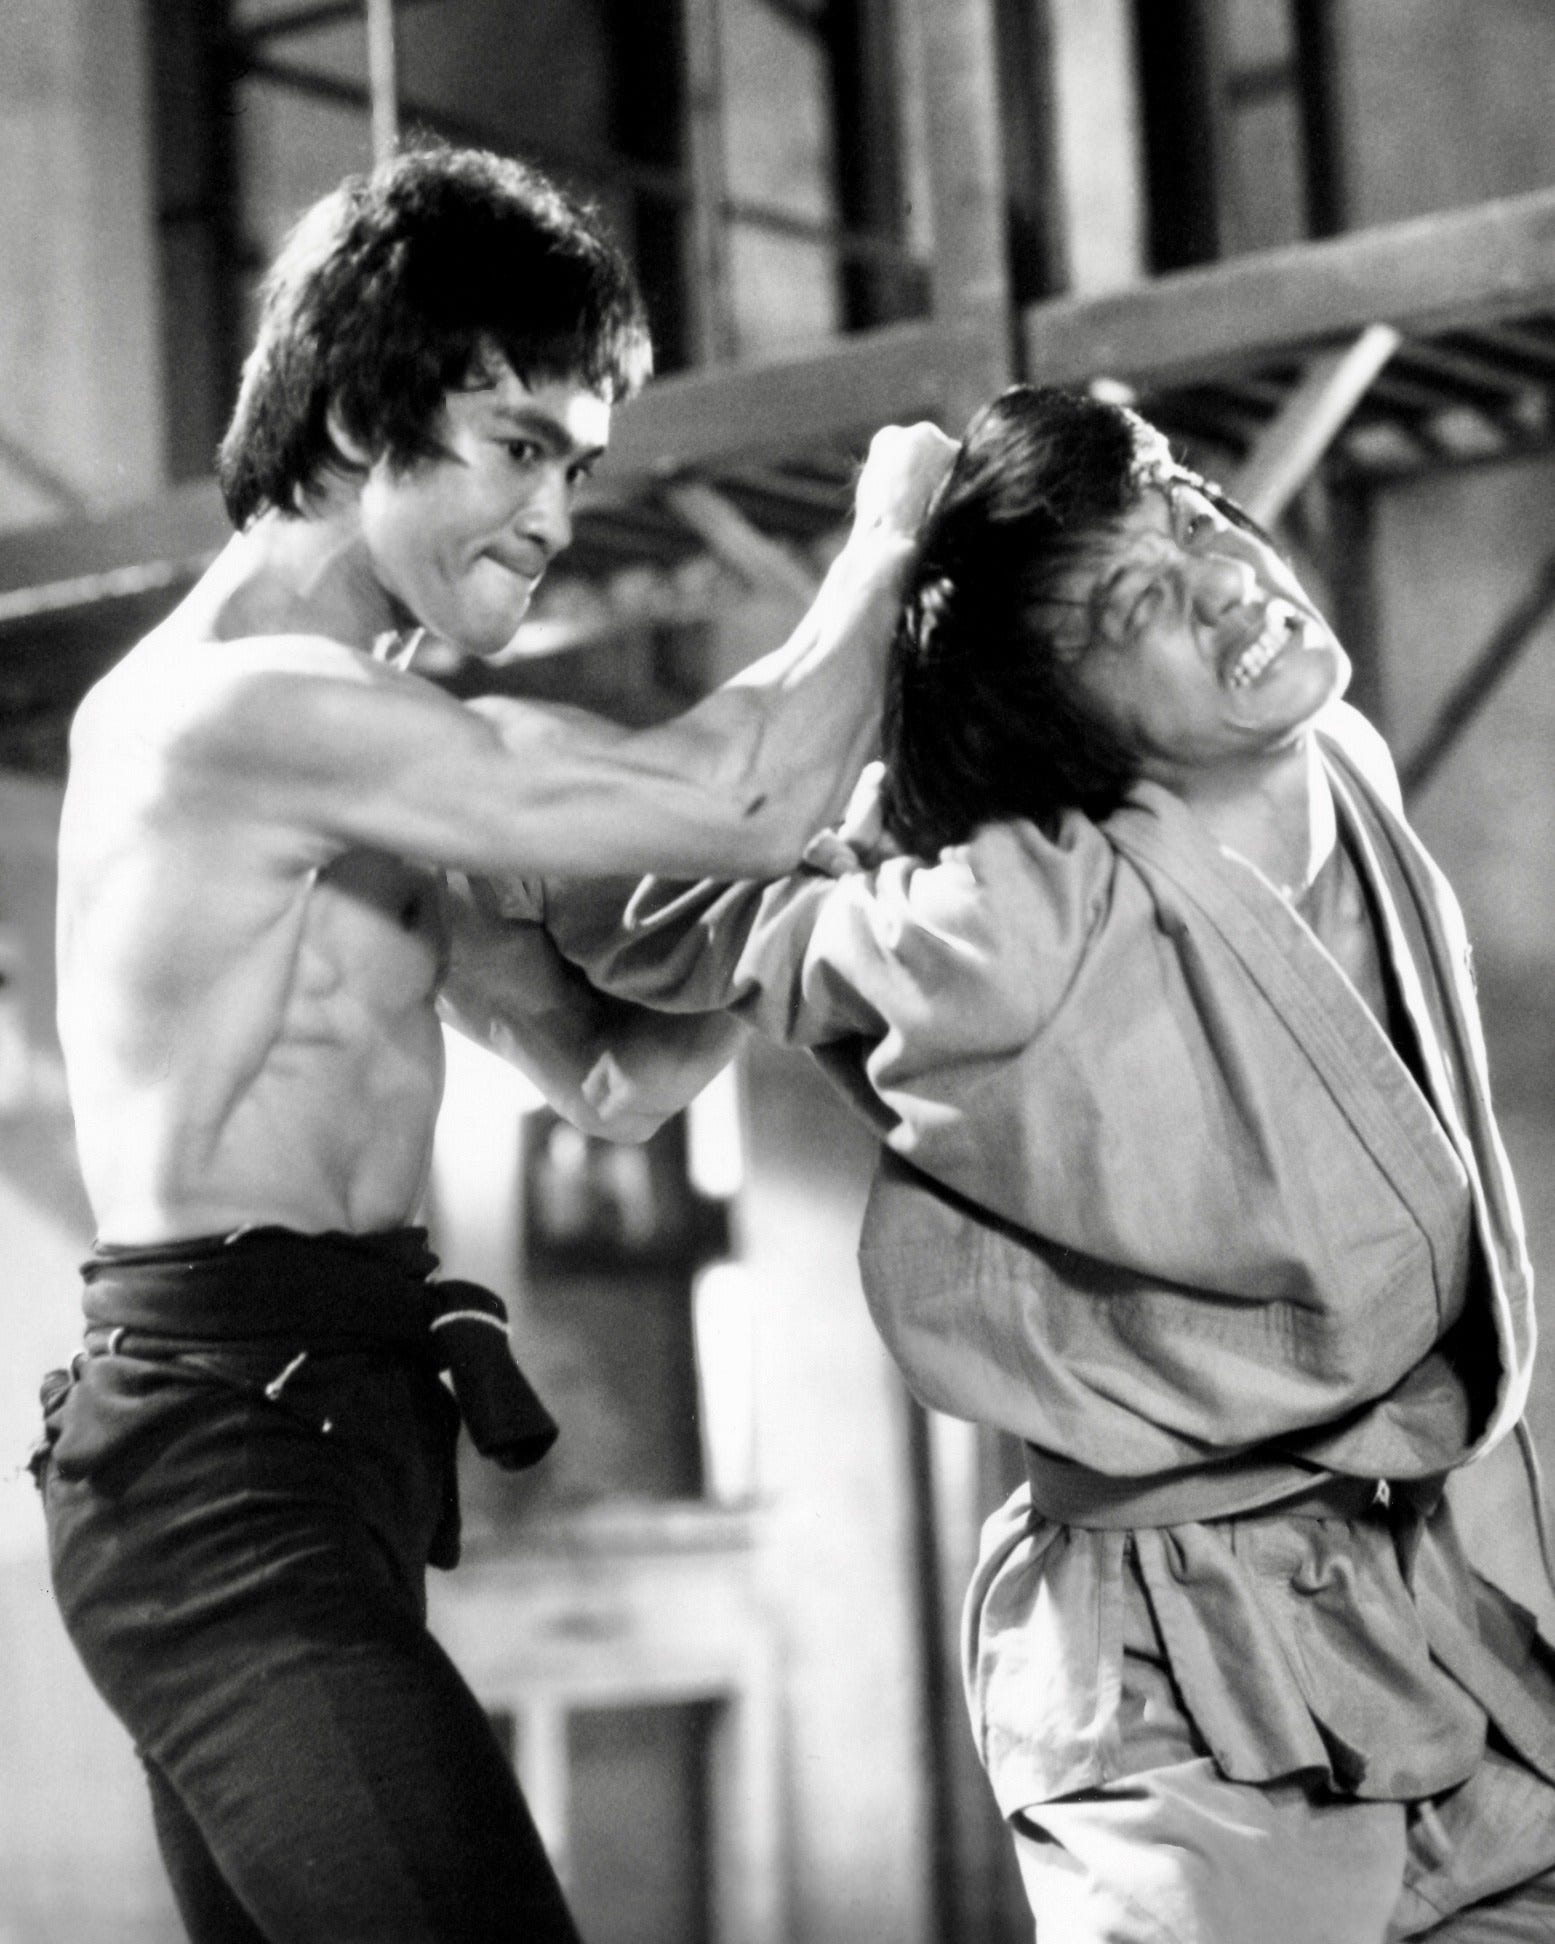 Bruce Lee biographer offers insights into martial artist's life